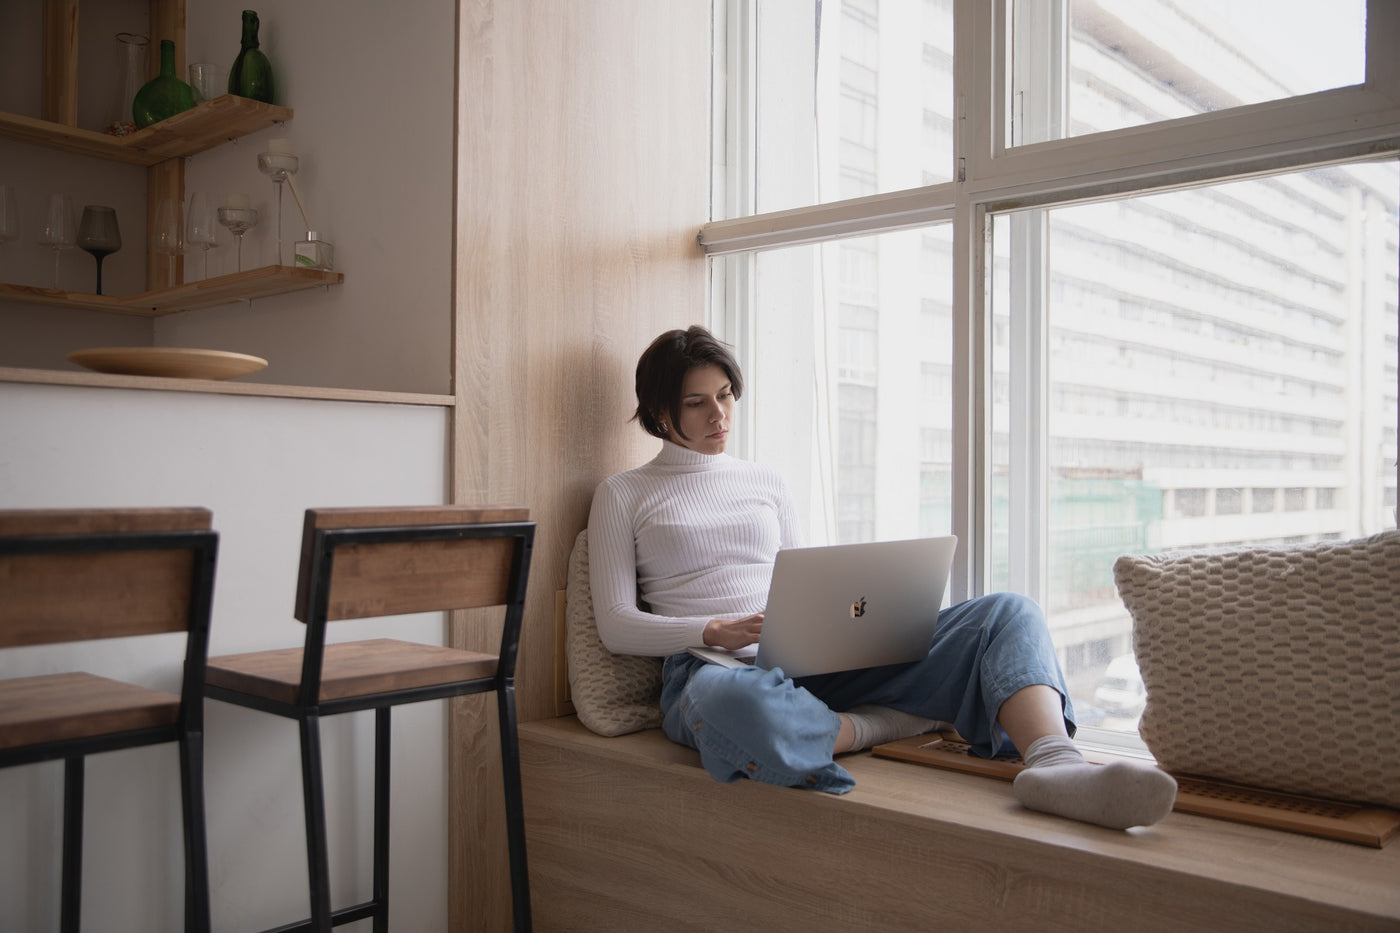 woman sitting on a window seat while working on her laptop, not an ideal set up for preventing back pain when working from home